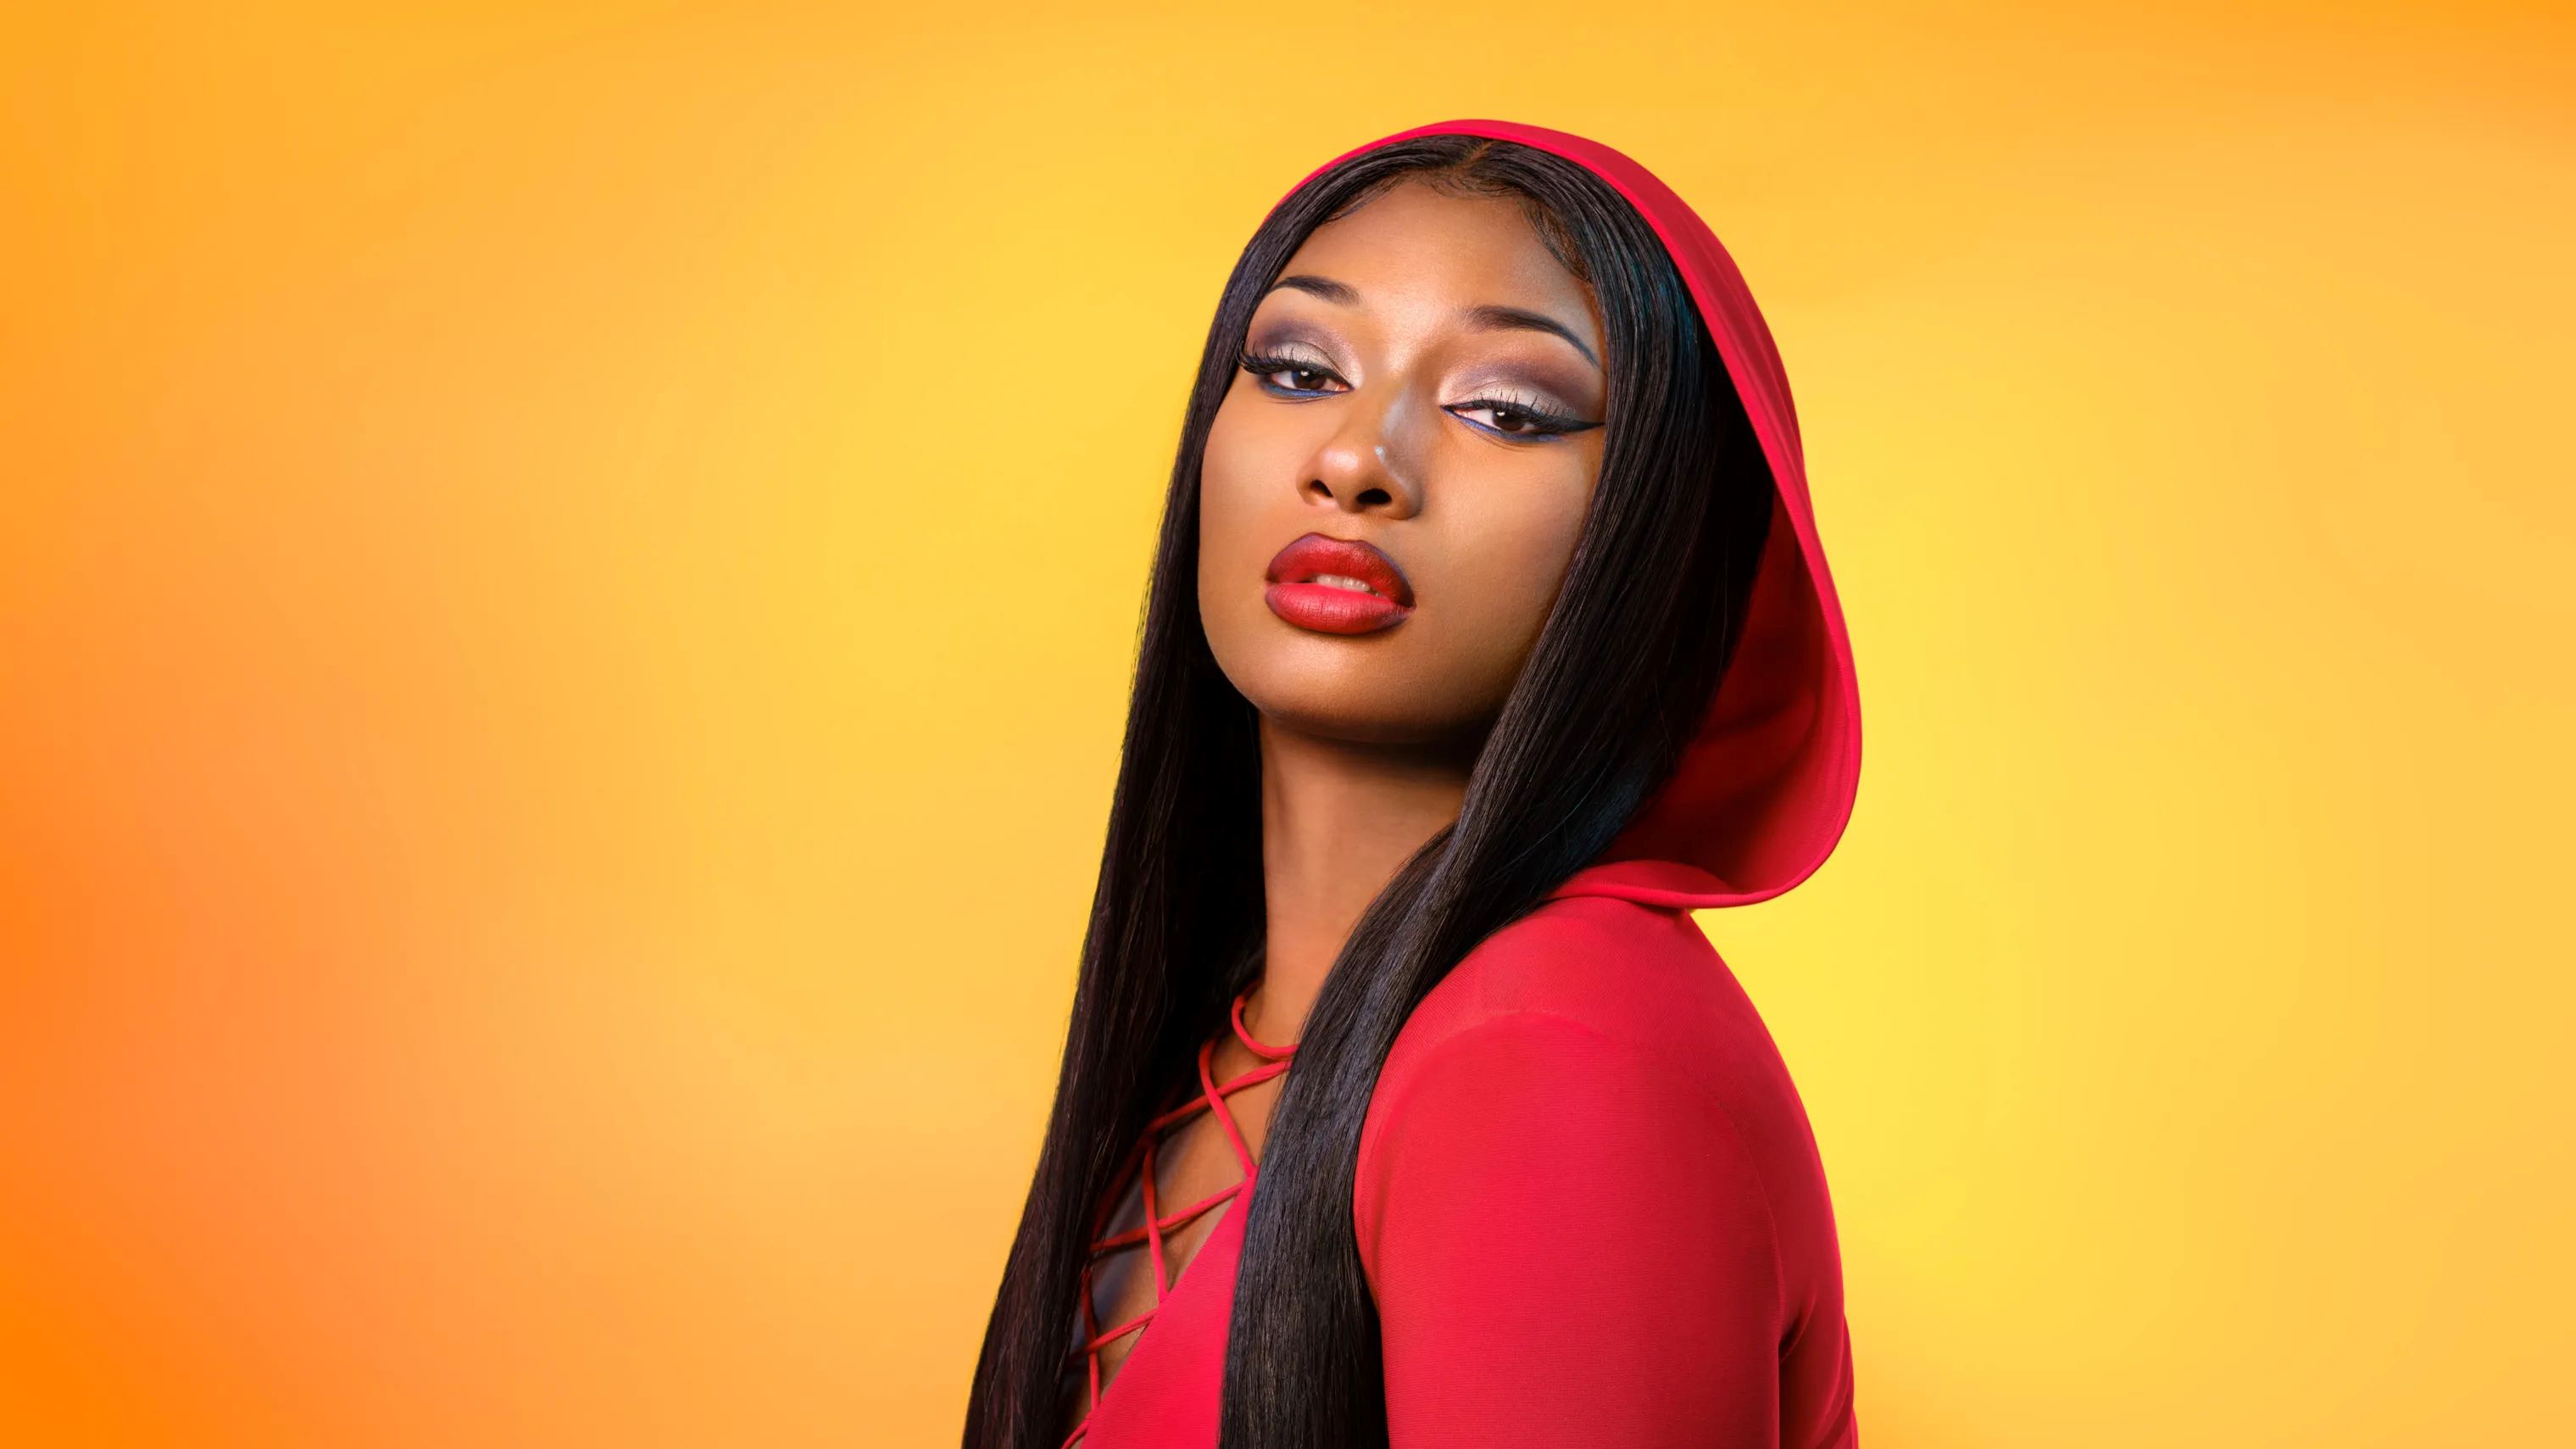 drakes-photographer-controversy-a-response-to-megan-thee-stallion-accusations